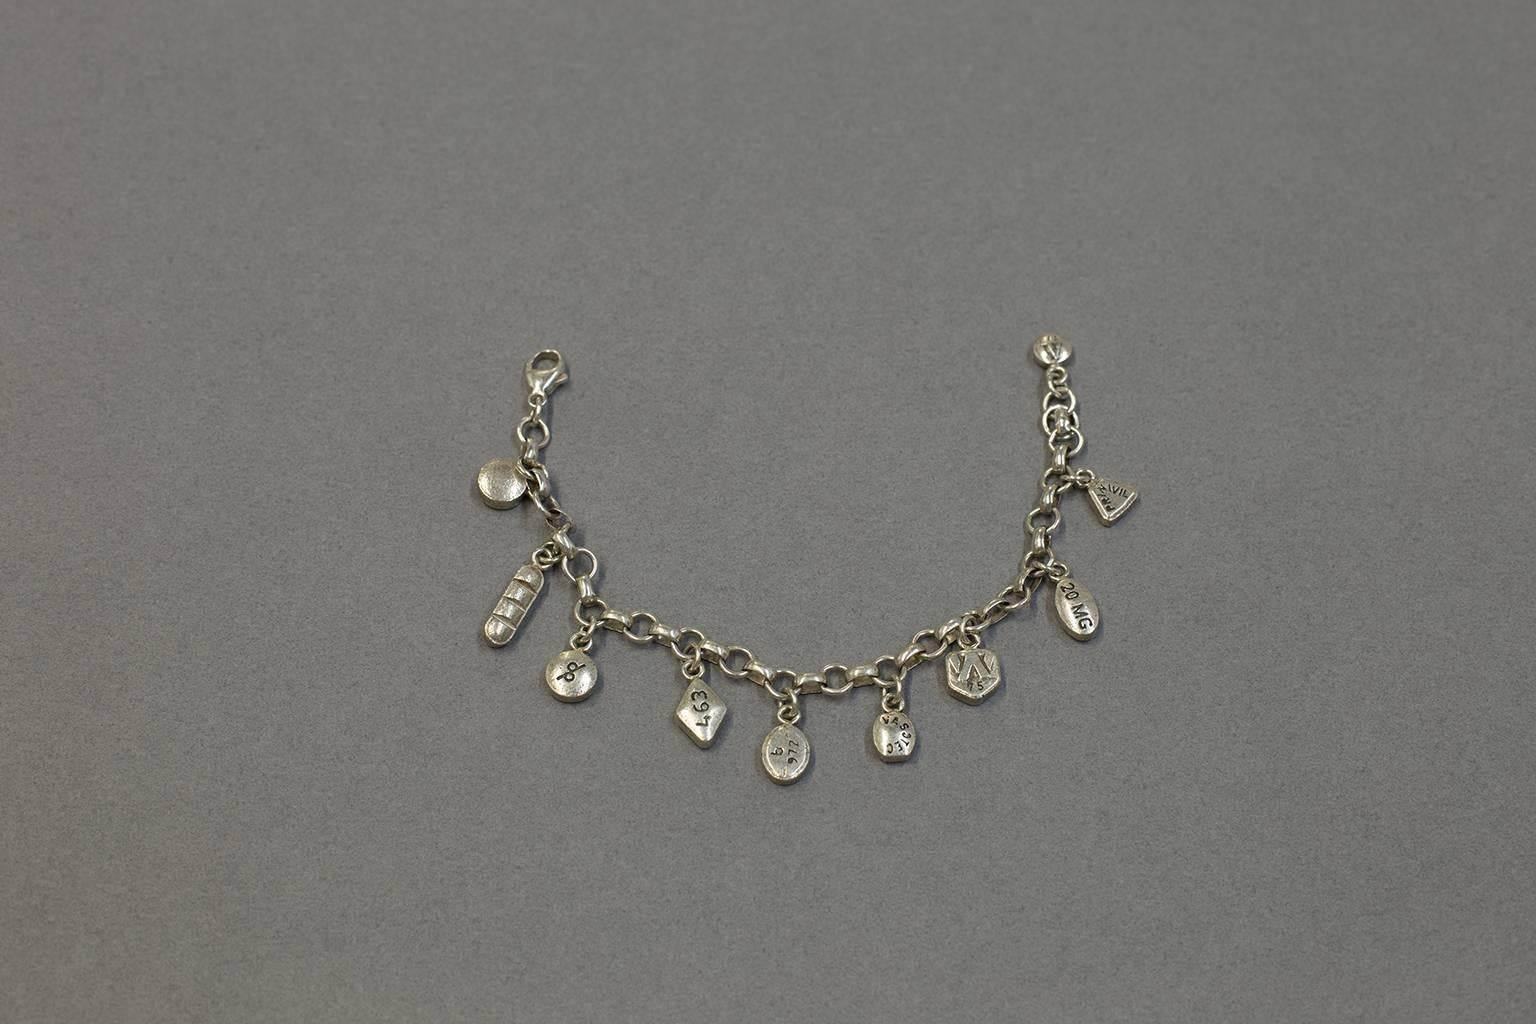 Untitled (9 Charm Bracelet) - Contemporary Sculpture by Colleen Wolstenholme